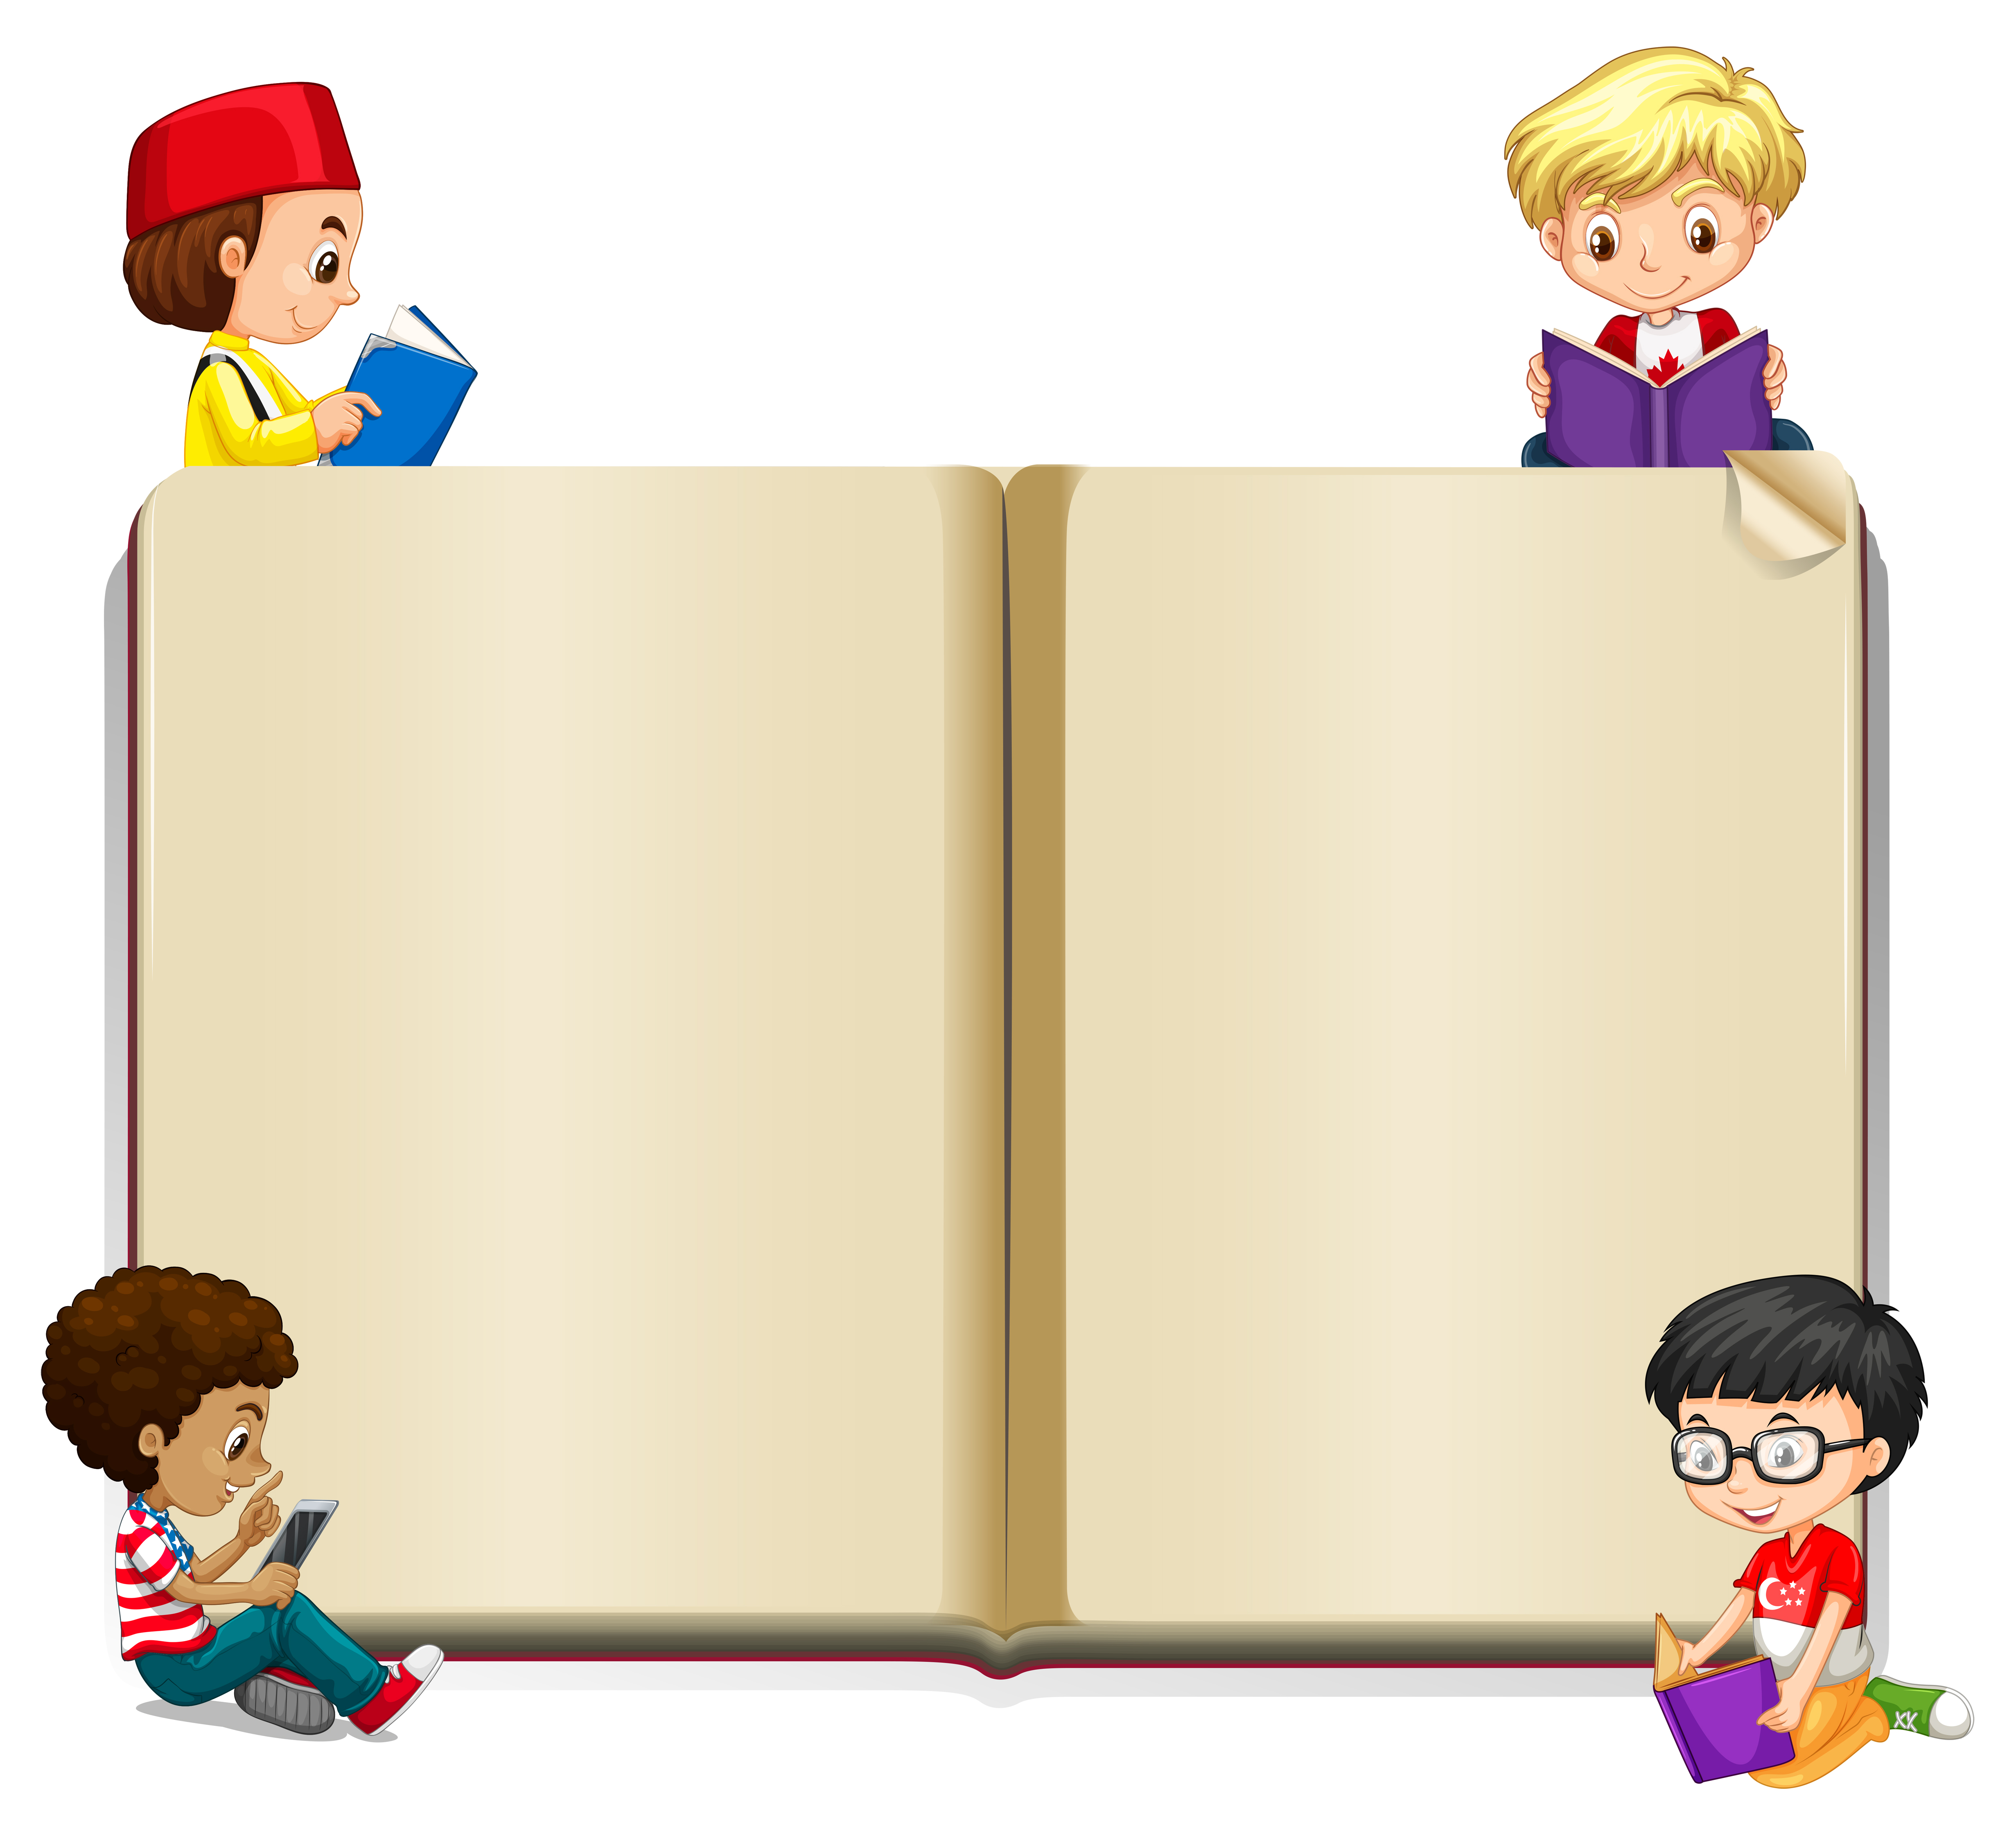 Book Template For Kids from static.vecteezy.com